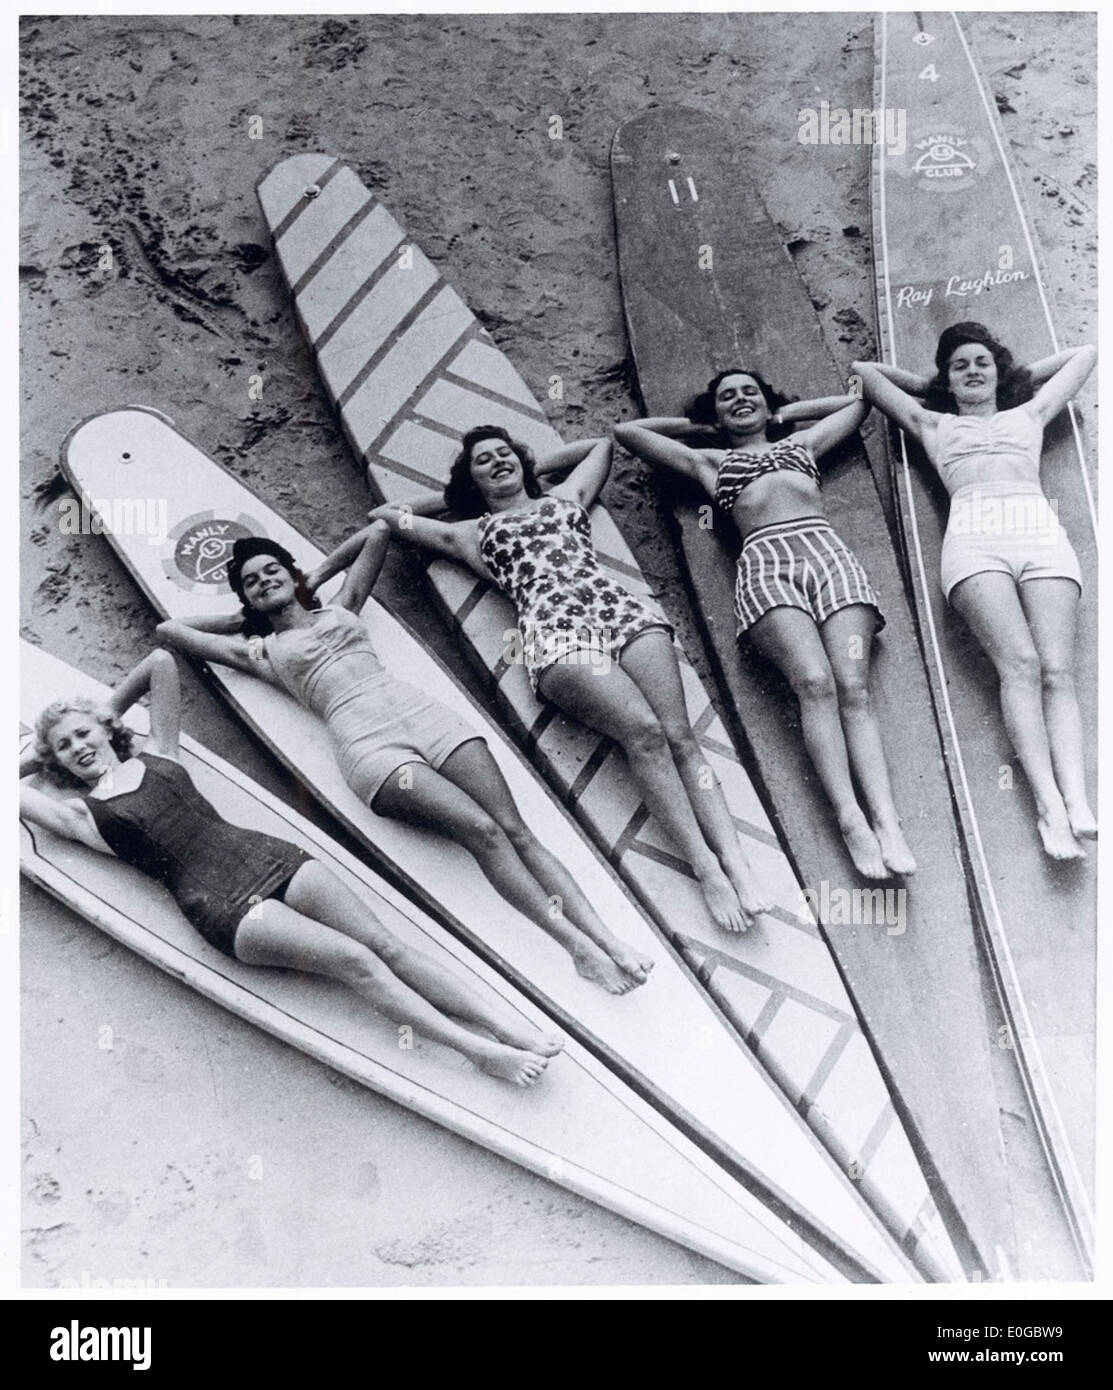 Surf sirens, Manly beach, New South Wales, 1938-46 Stock Photo